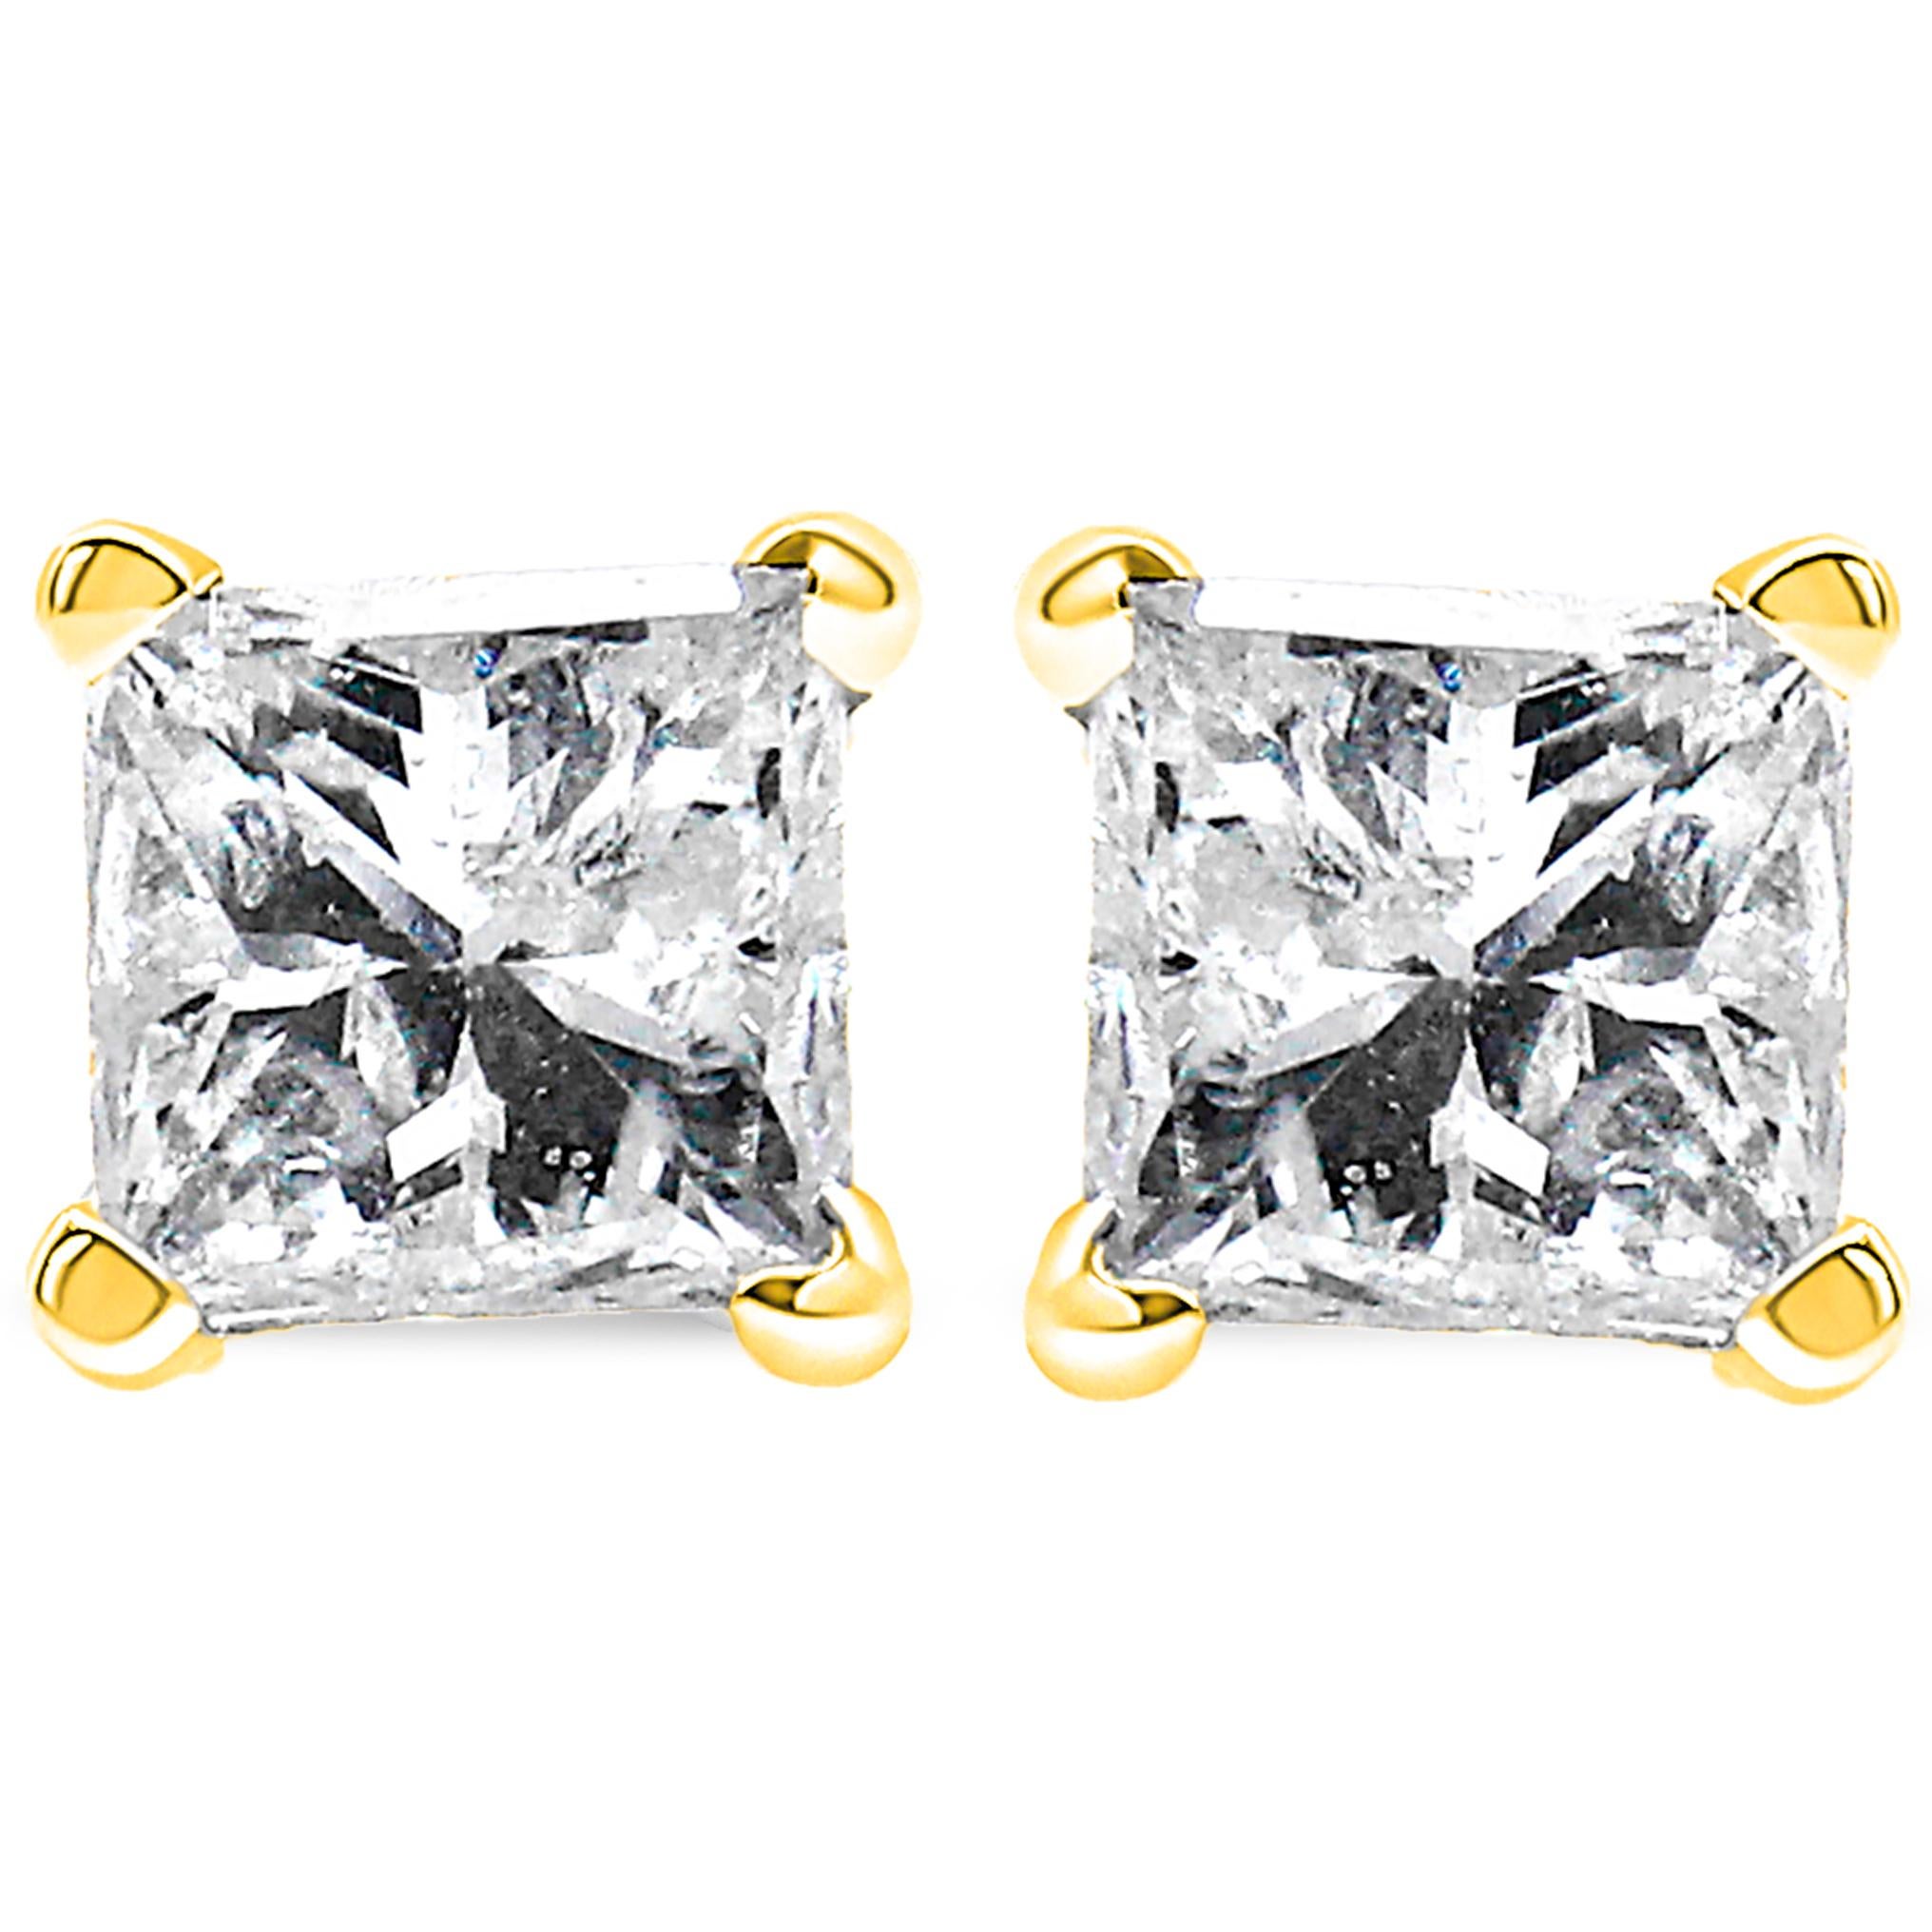 Add a touch of luxury to your everyday look with these beautiful IGI certified princess cut diamond stud earrings. Each earring features a natural diamond weighing 1/2 carats, cut in a classic princess shape and set in a timeless 4-prong setting.